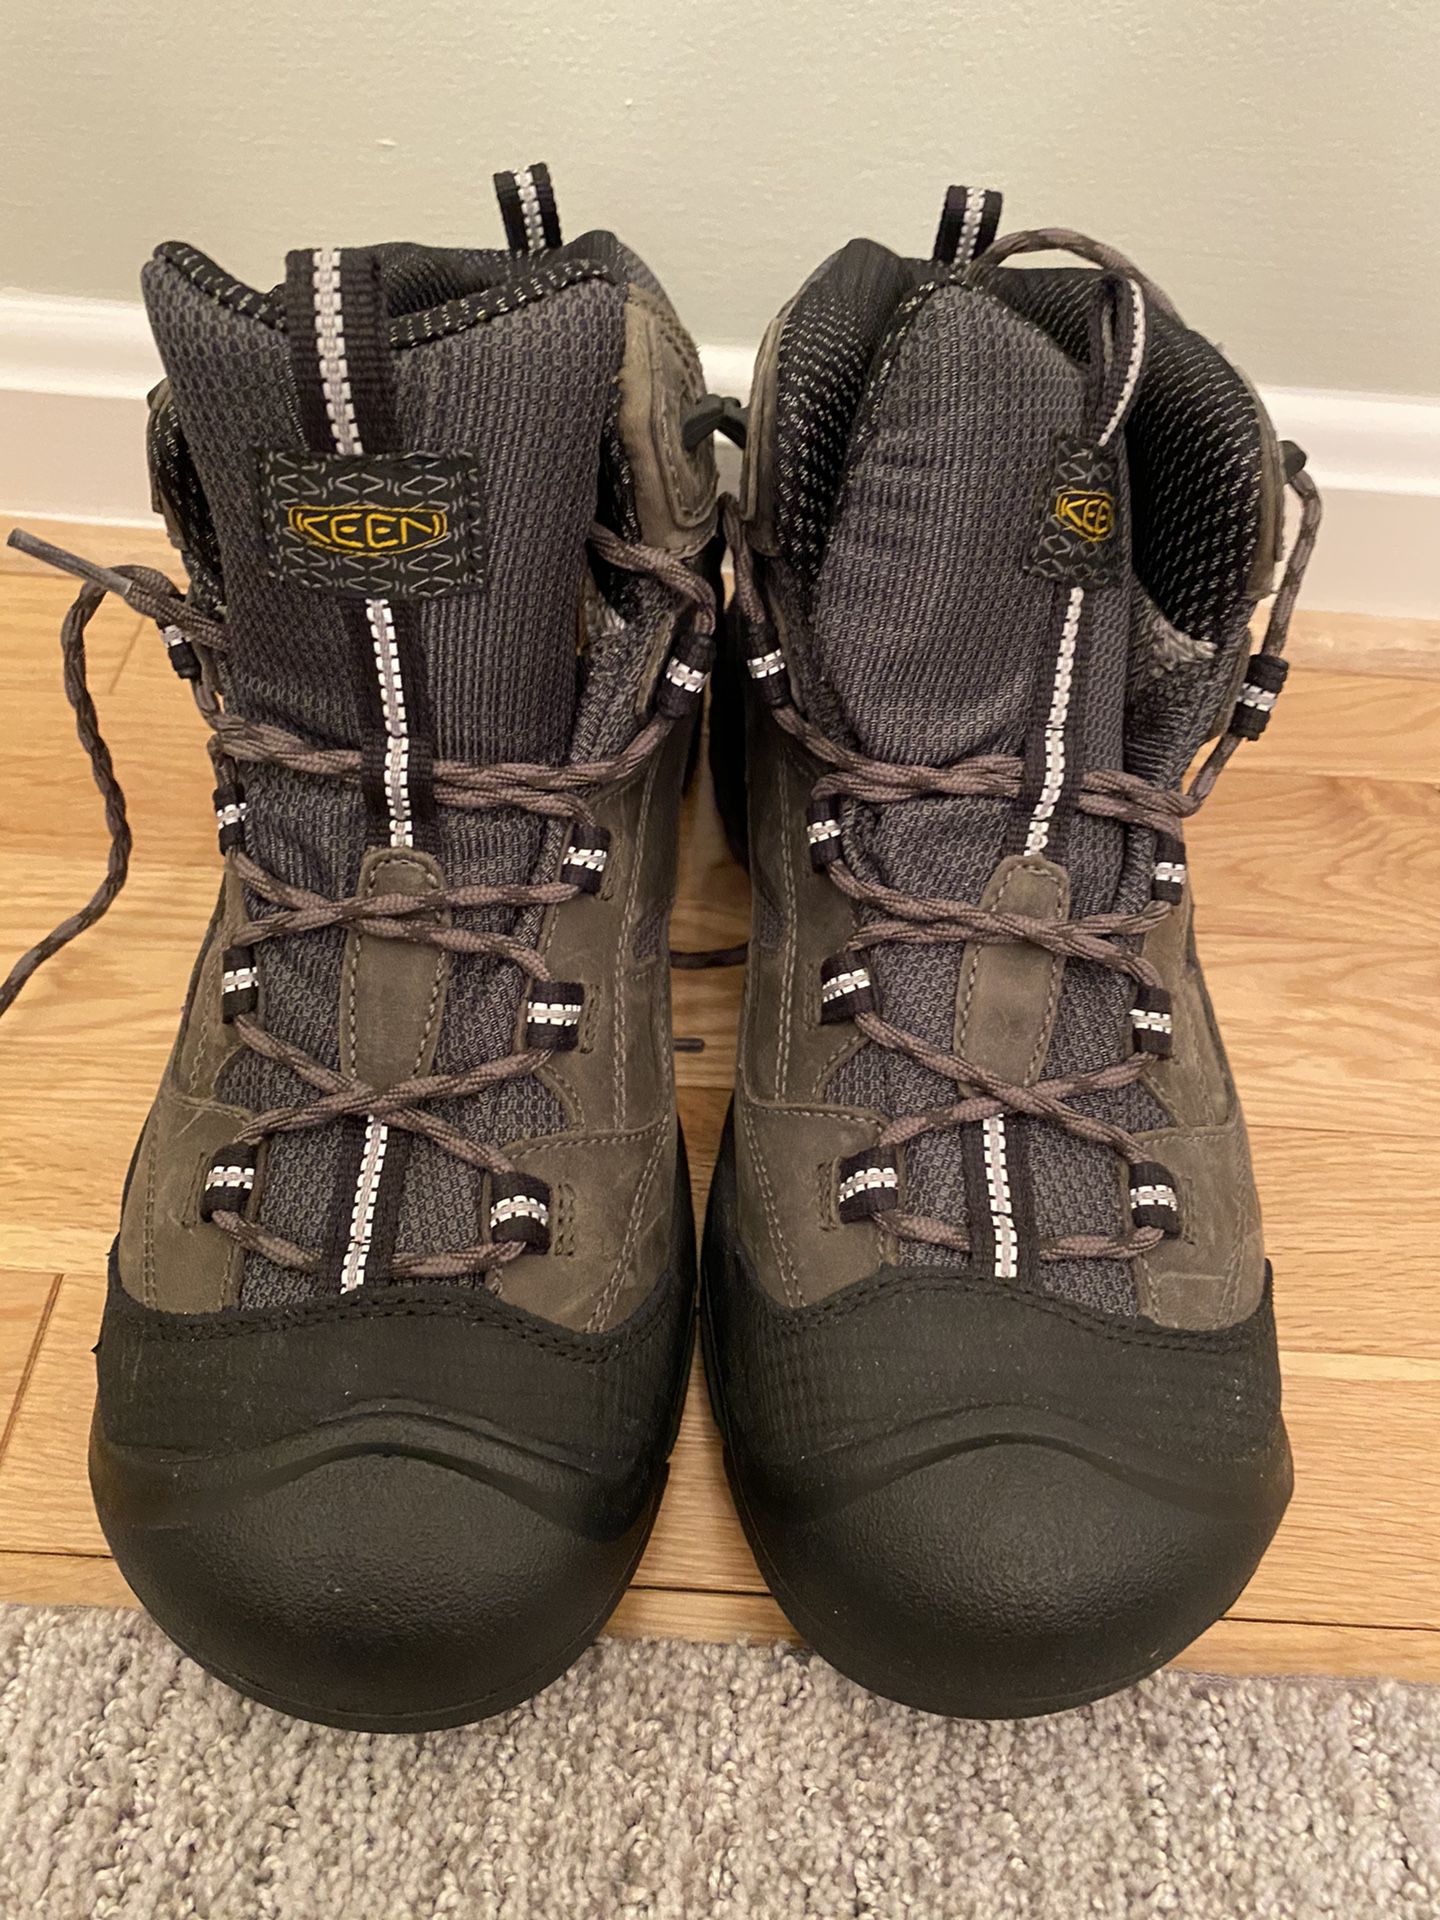 Keen steal toe boots. New size 10.5